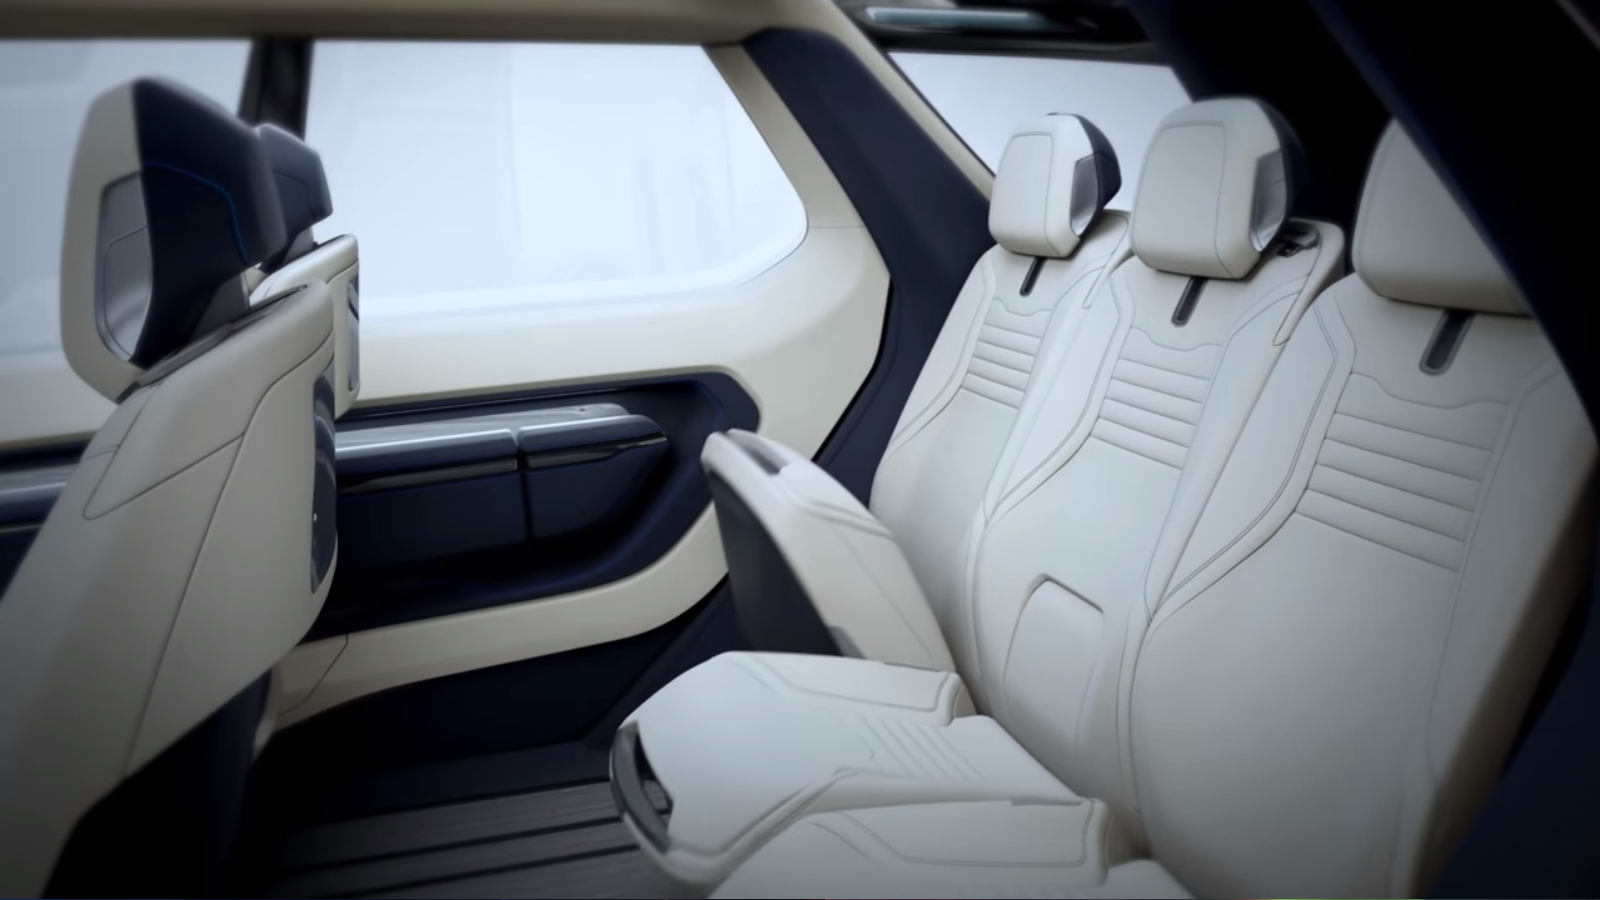 Land Rover New Discovery Vision interior side view